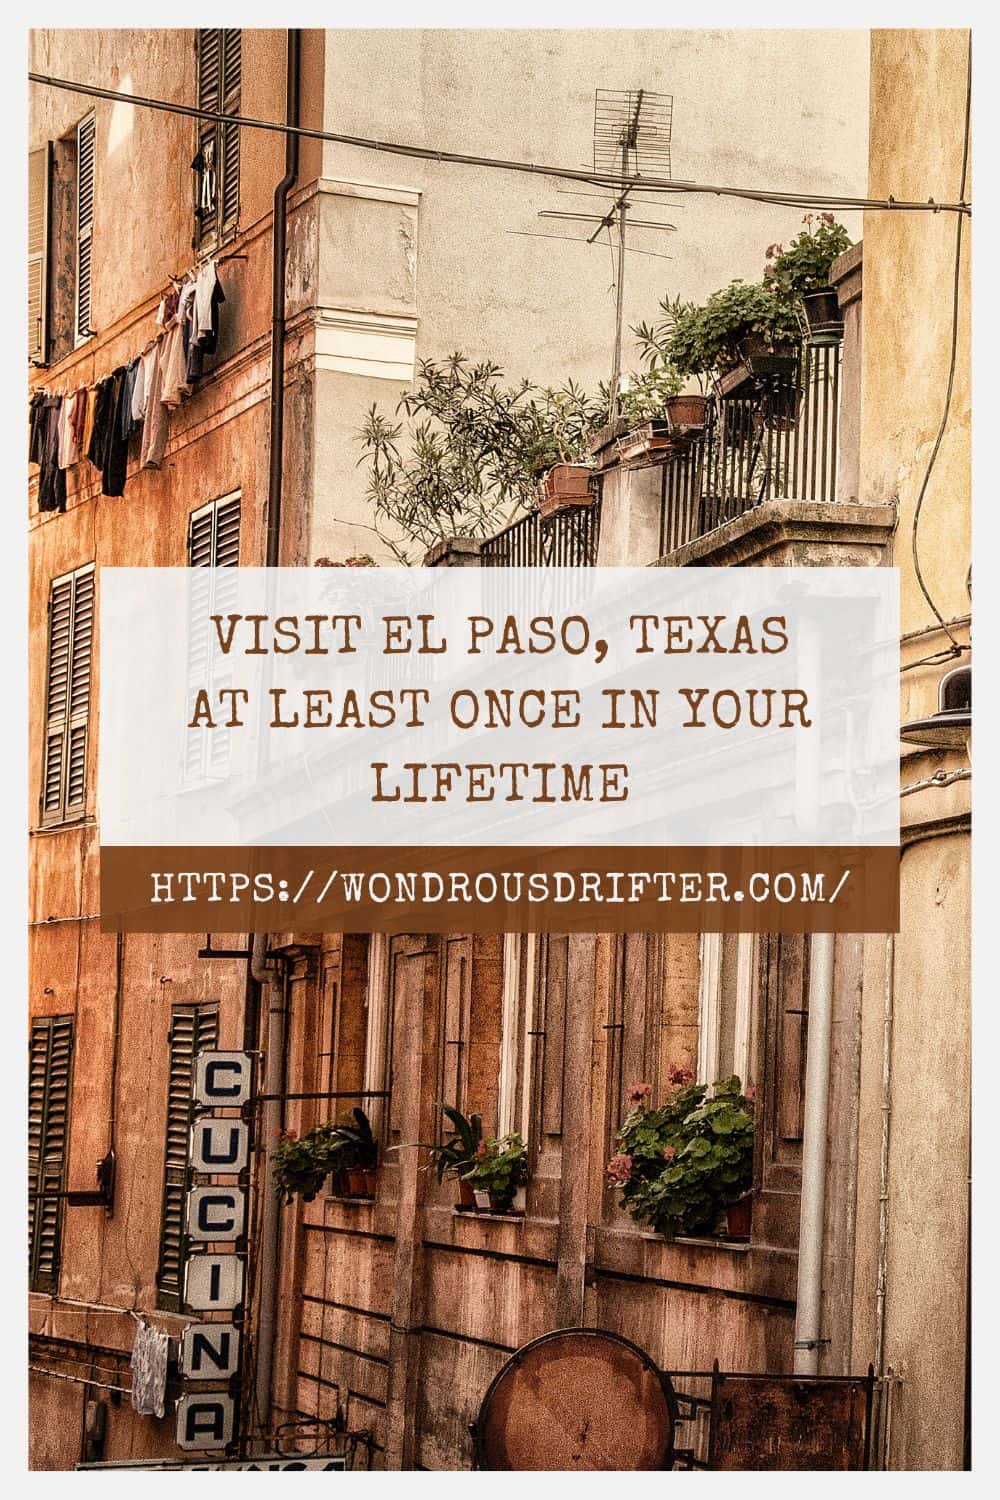 Visit El Paso Texas at least once in your lifetime